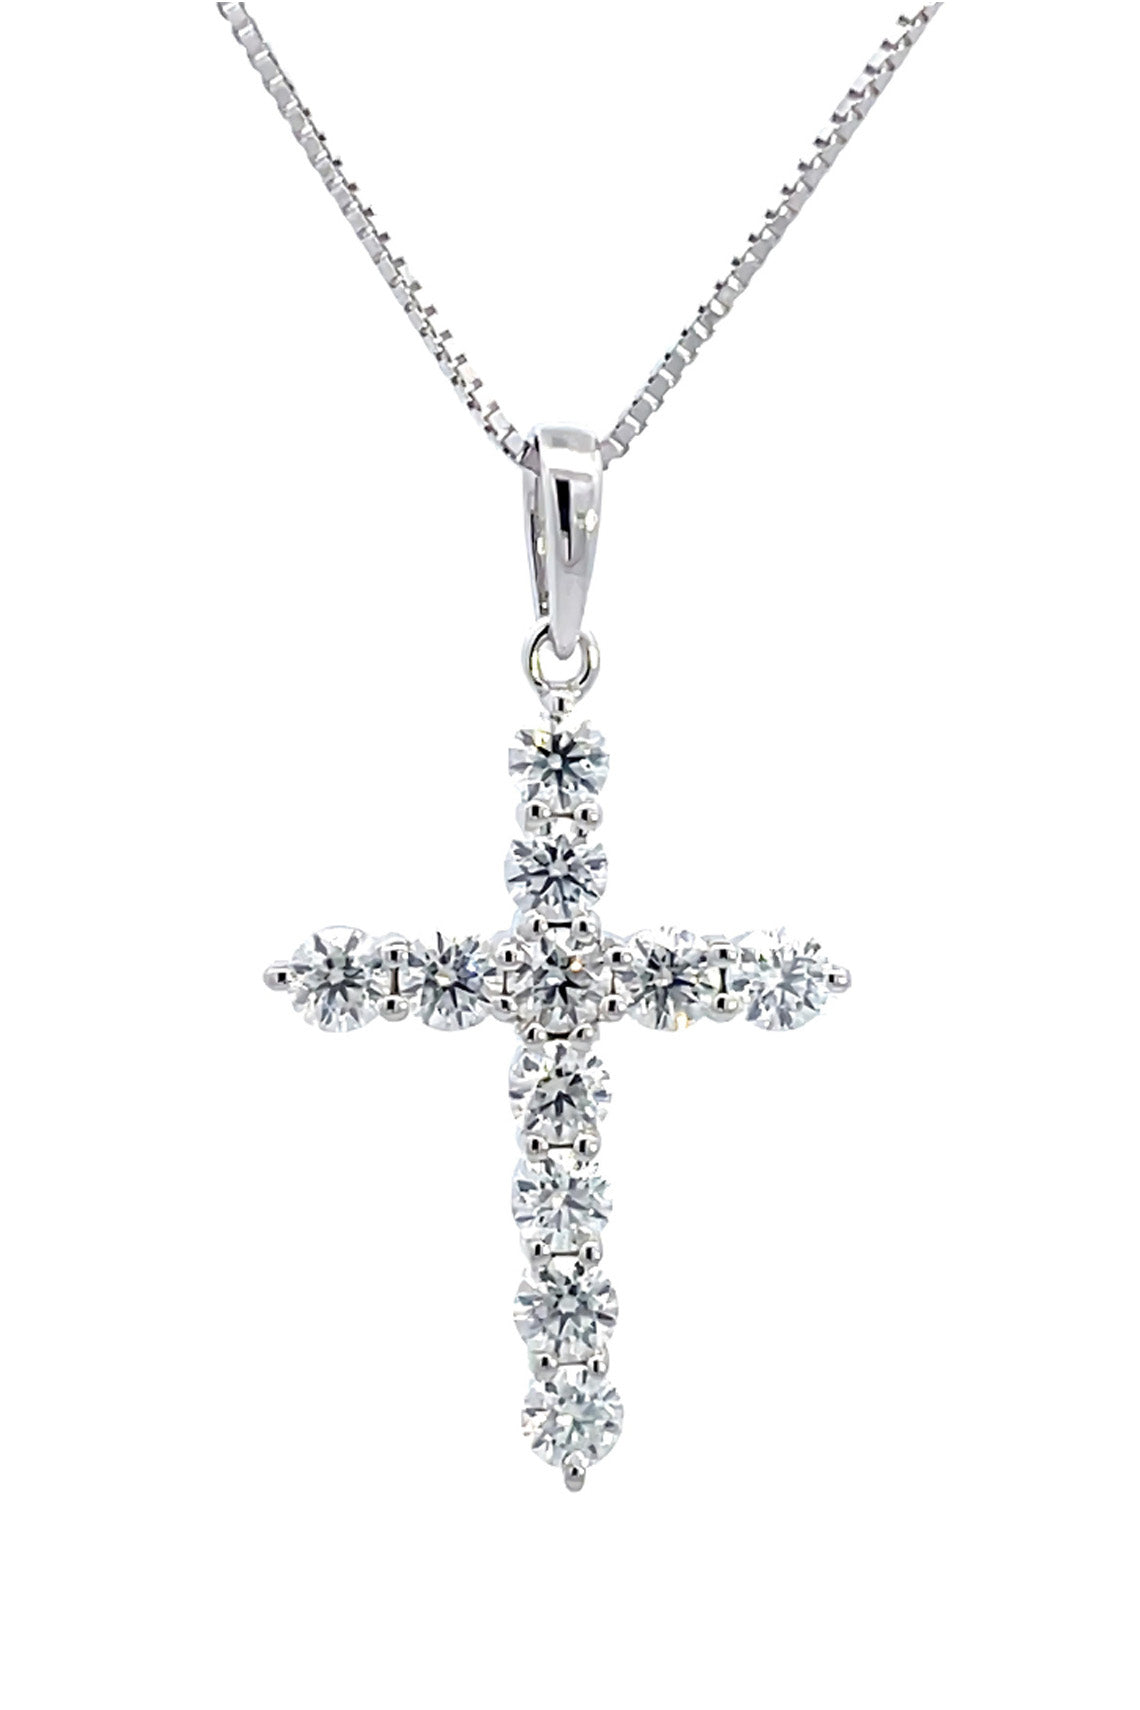 CROSS 1TCW IN 9CT WHITE GOLD PENDANT